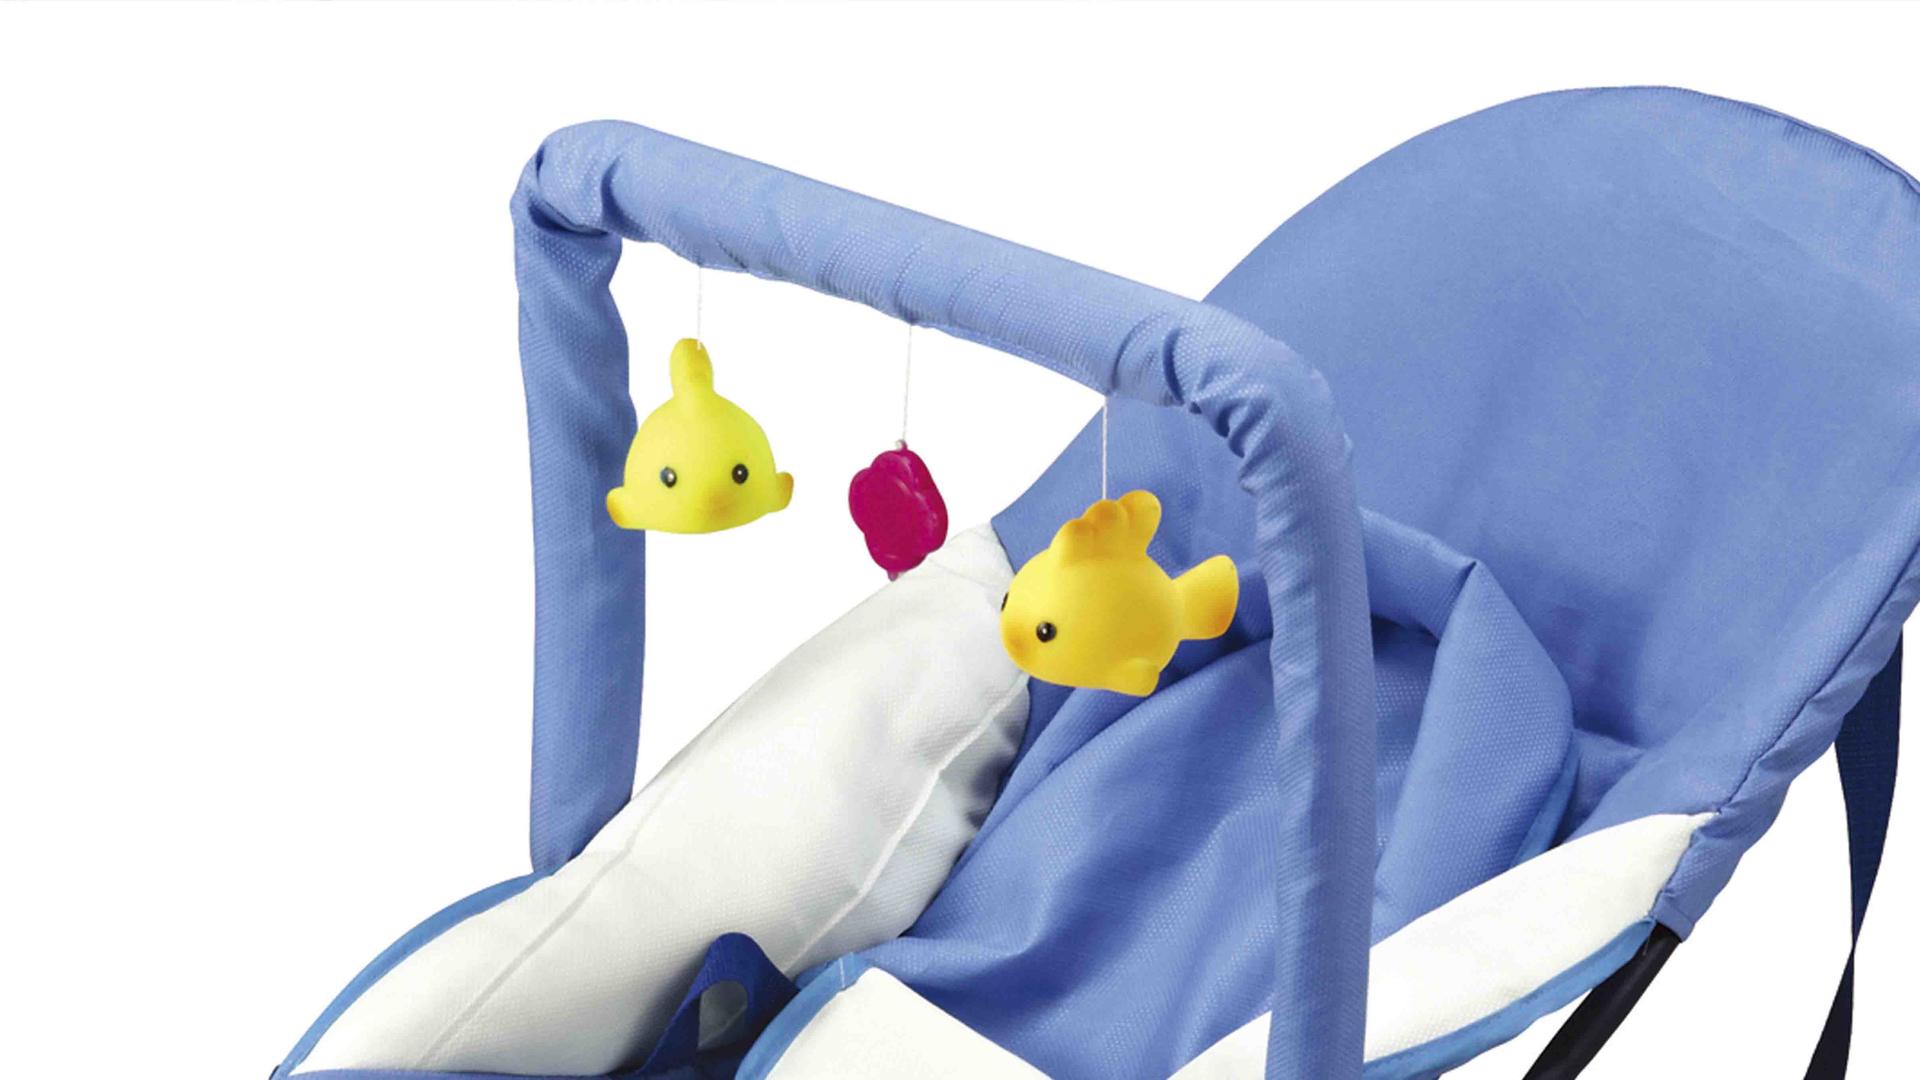 Aoqi baby bouncer online factory price for infant